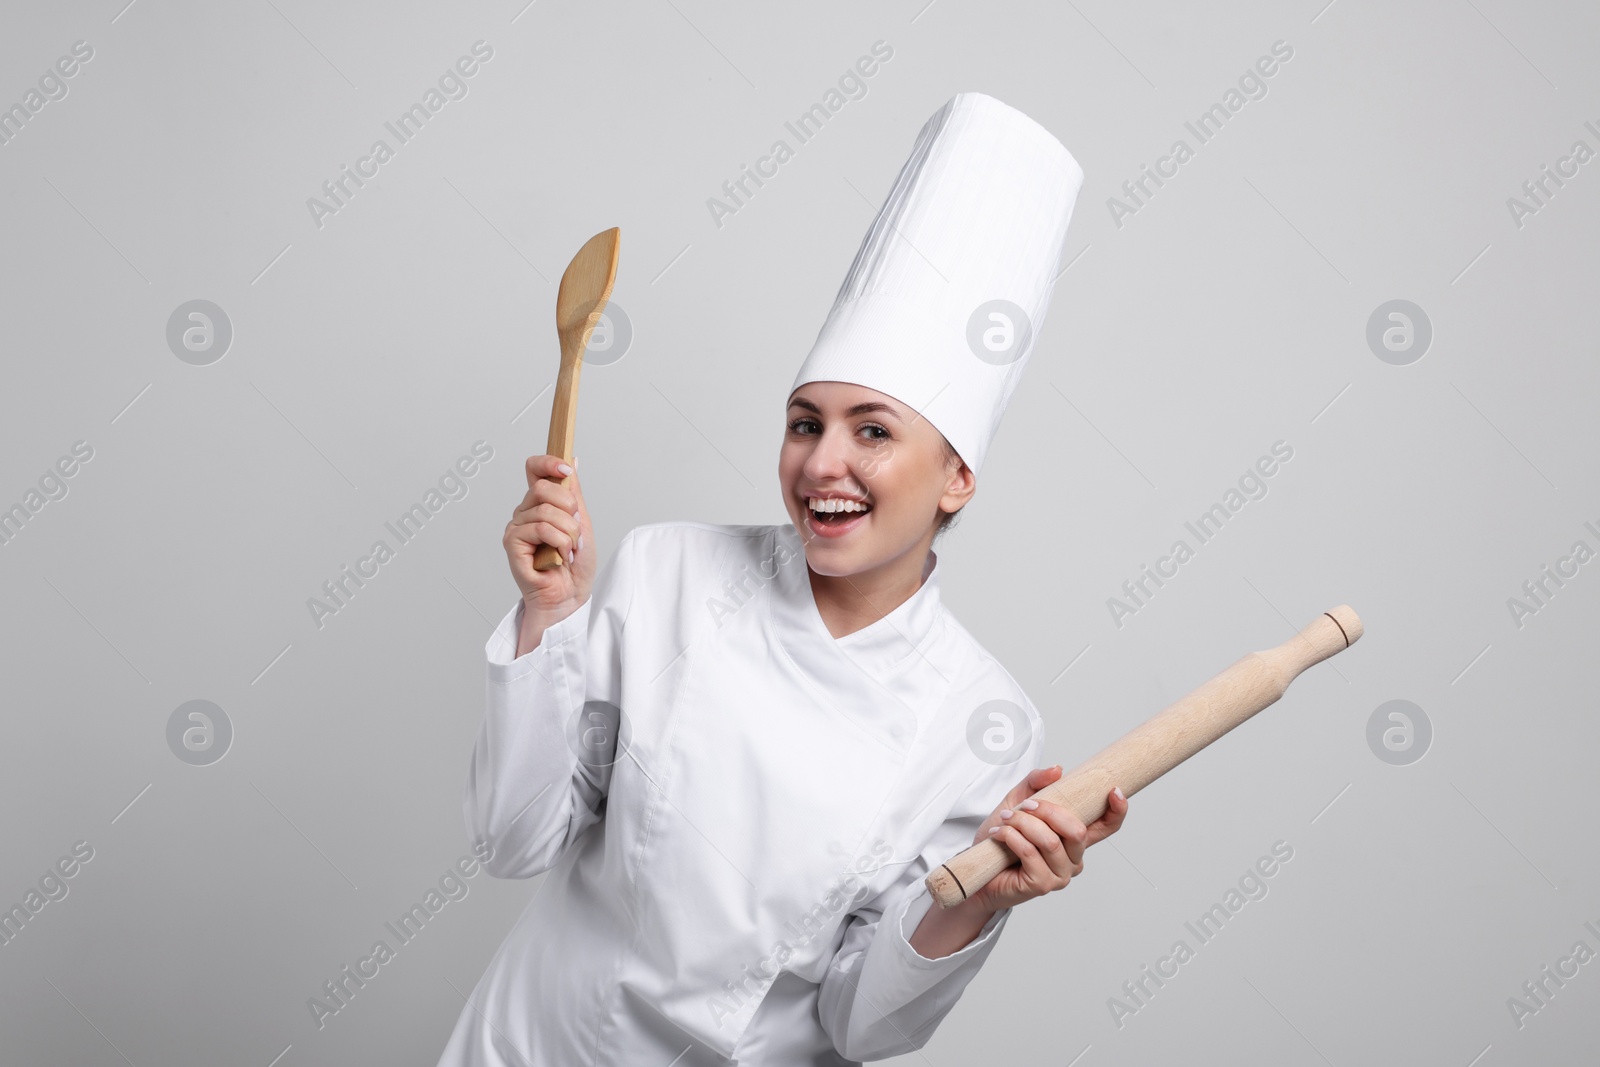 Photo of Happy professional confectioner in uniform holding wooden rolling pin and spatula on light grey background